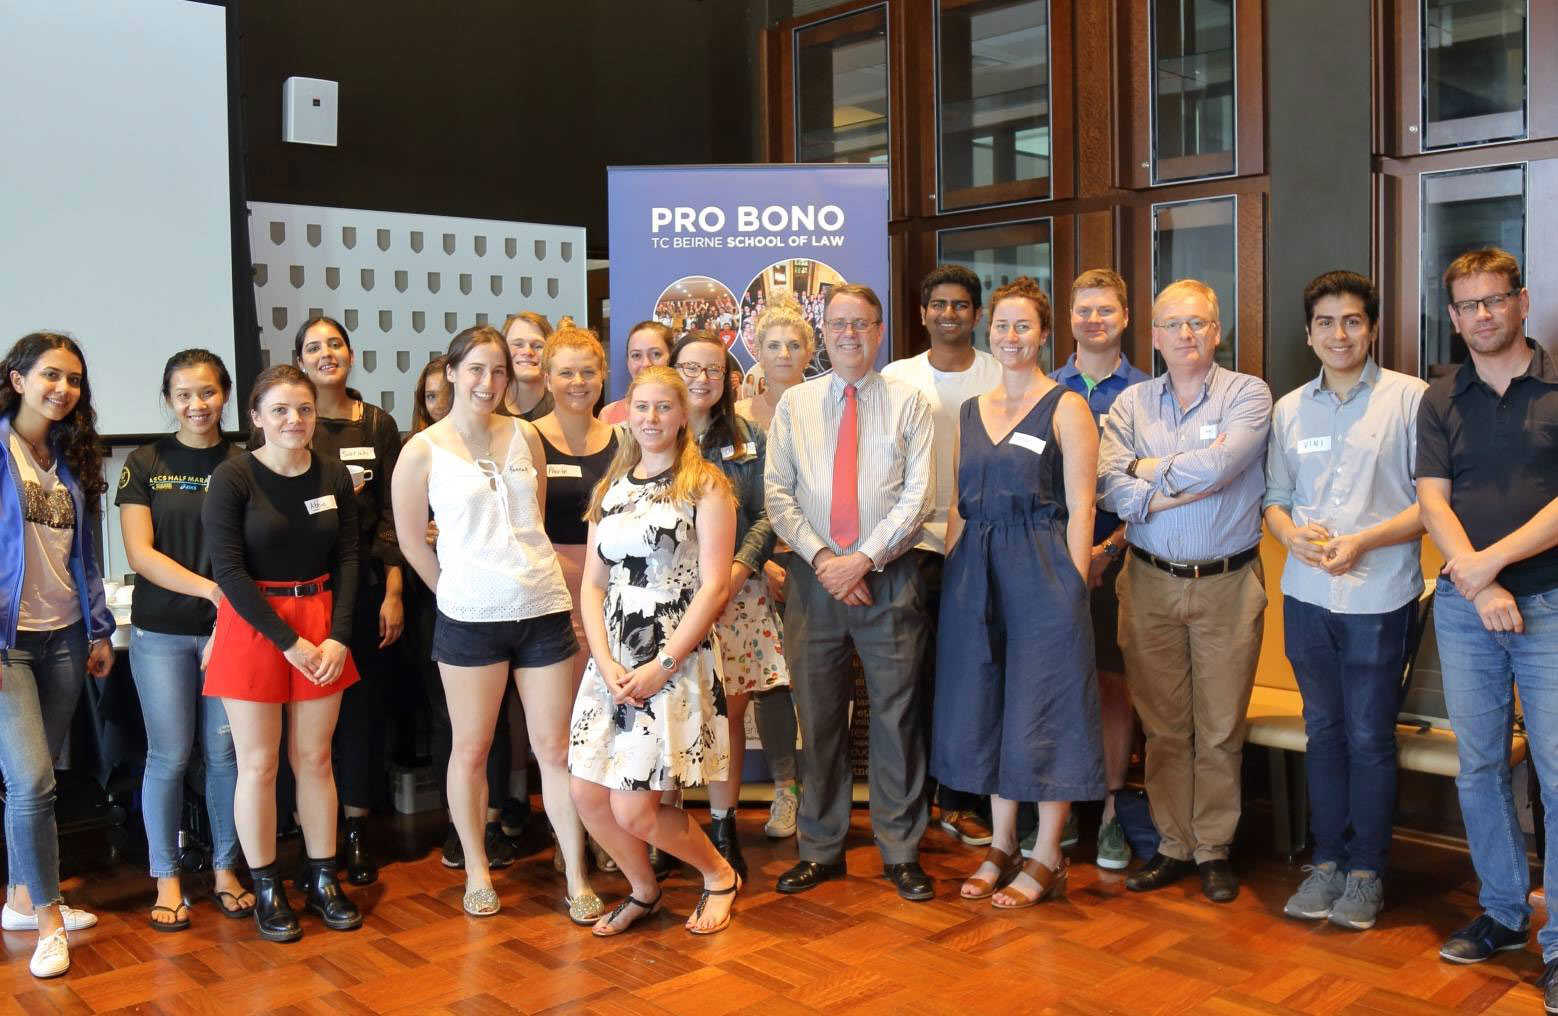 Pro Bono Centre Roster students and staff